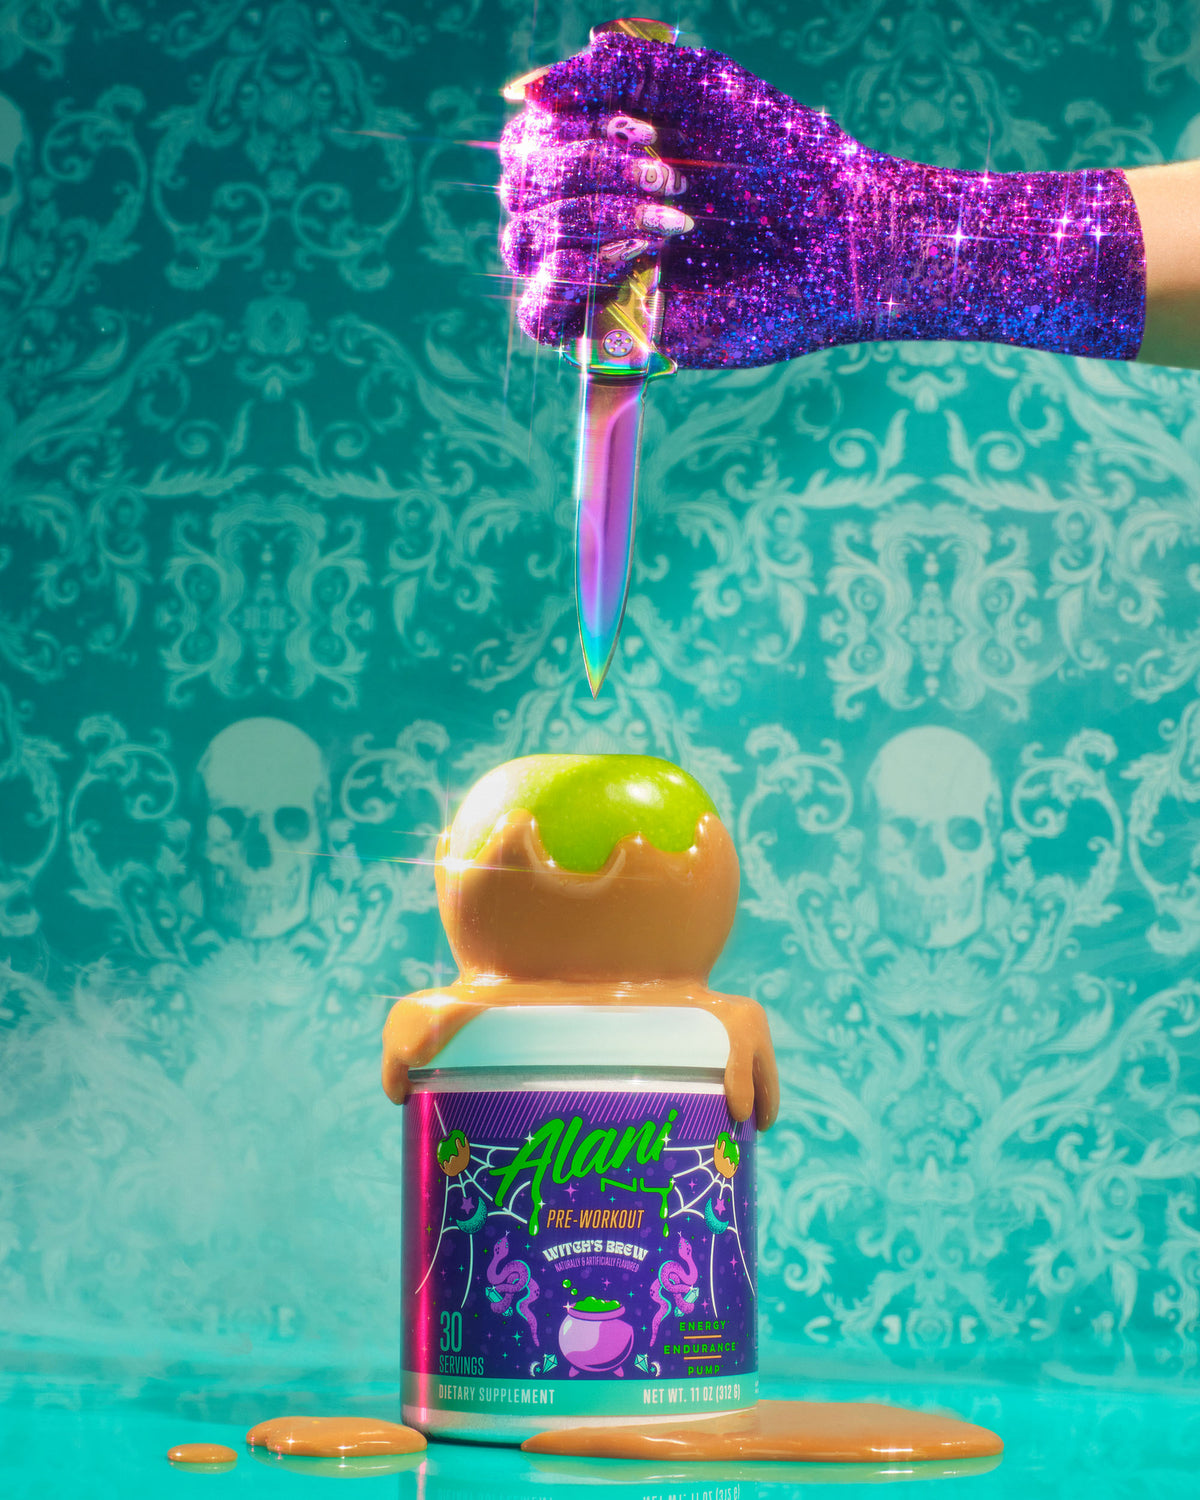 Witch&#39;s Brew - Pre-Workout displayed alongside a caramel apple, while a women is holding a knife.